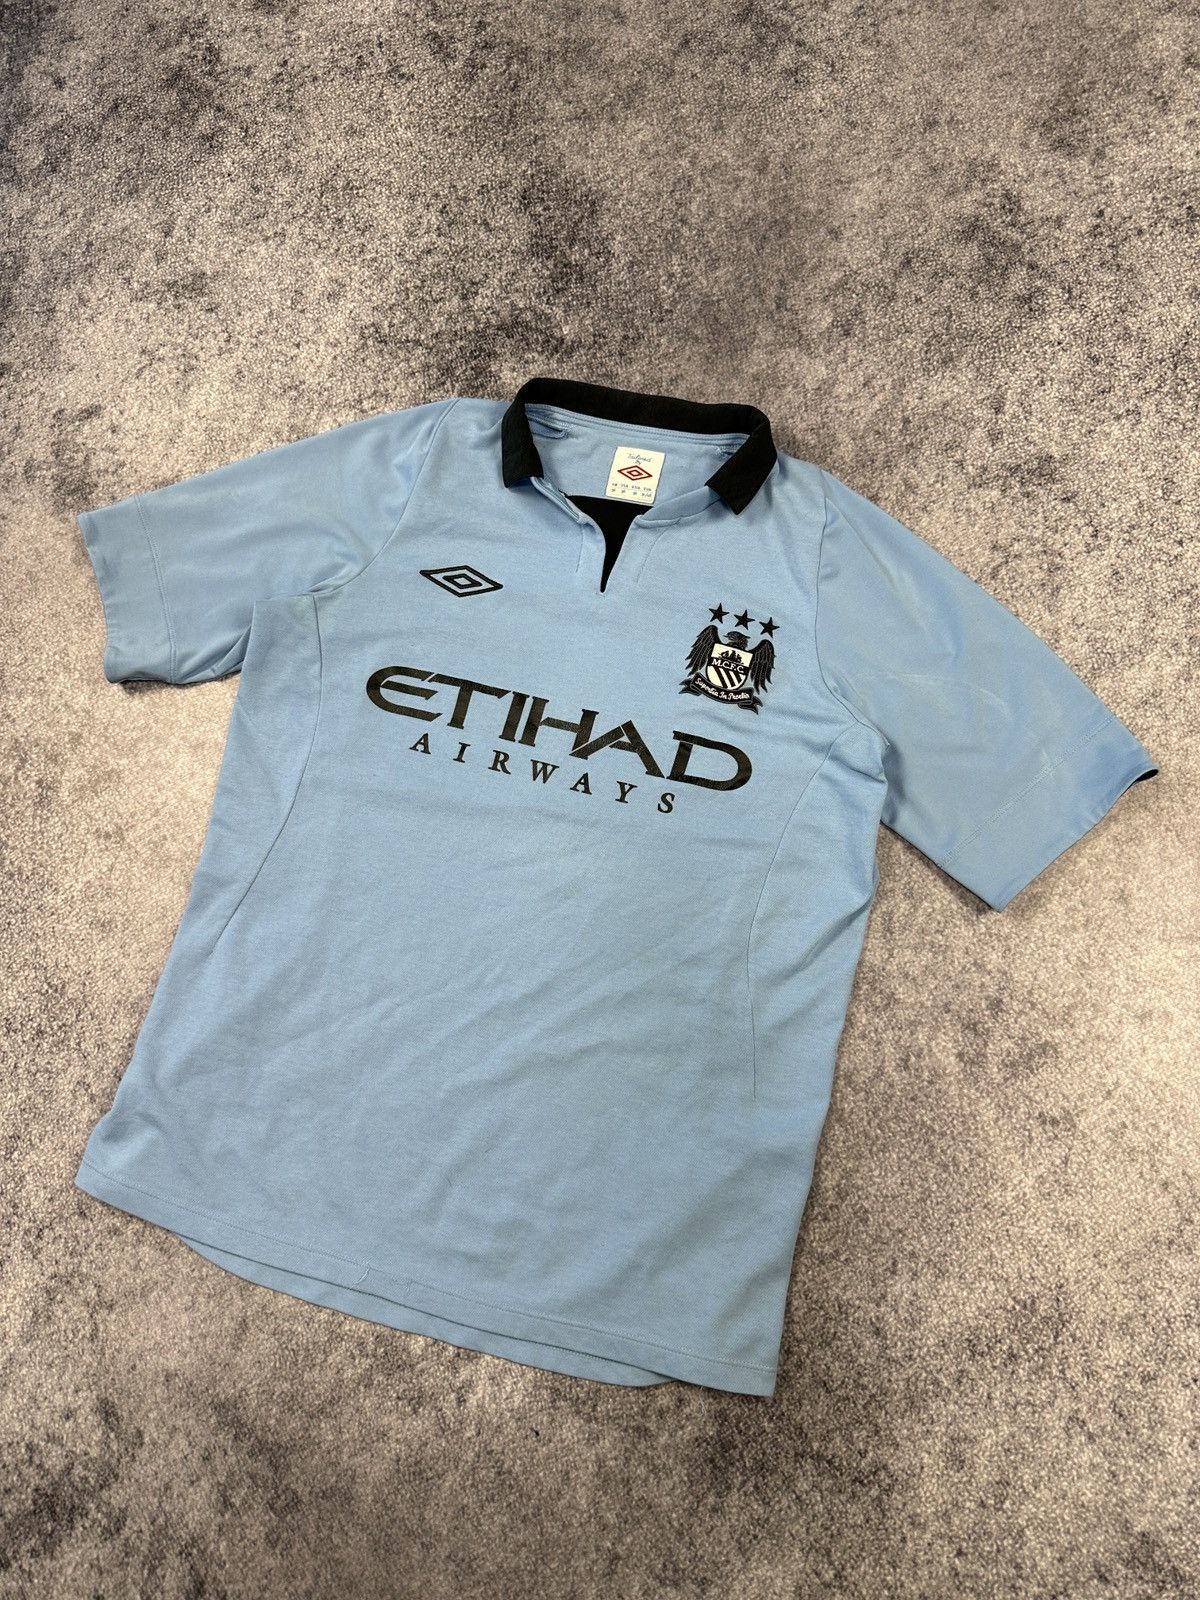 Pre-owned Soccer Jersey X Umbro Vintage Umbro Manchester City Soccer Jersey Blokecore S In Blue